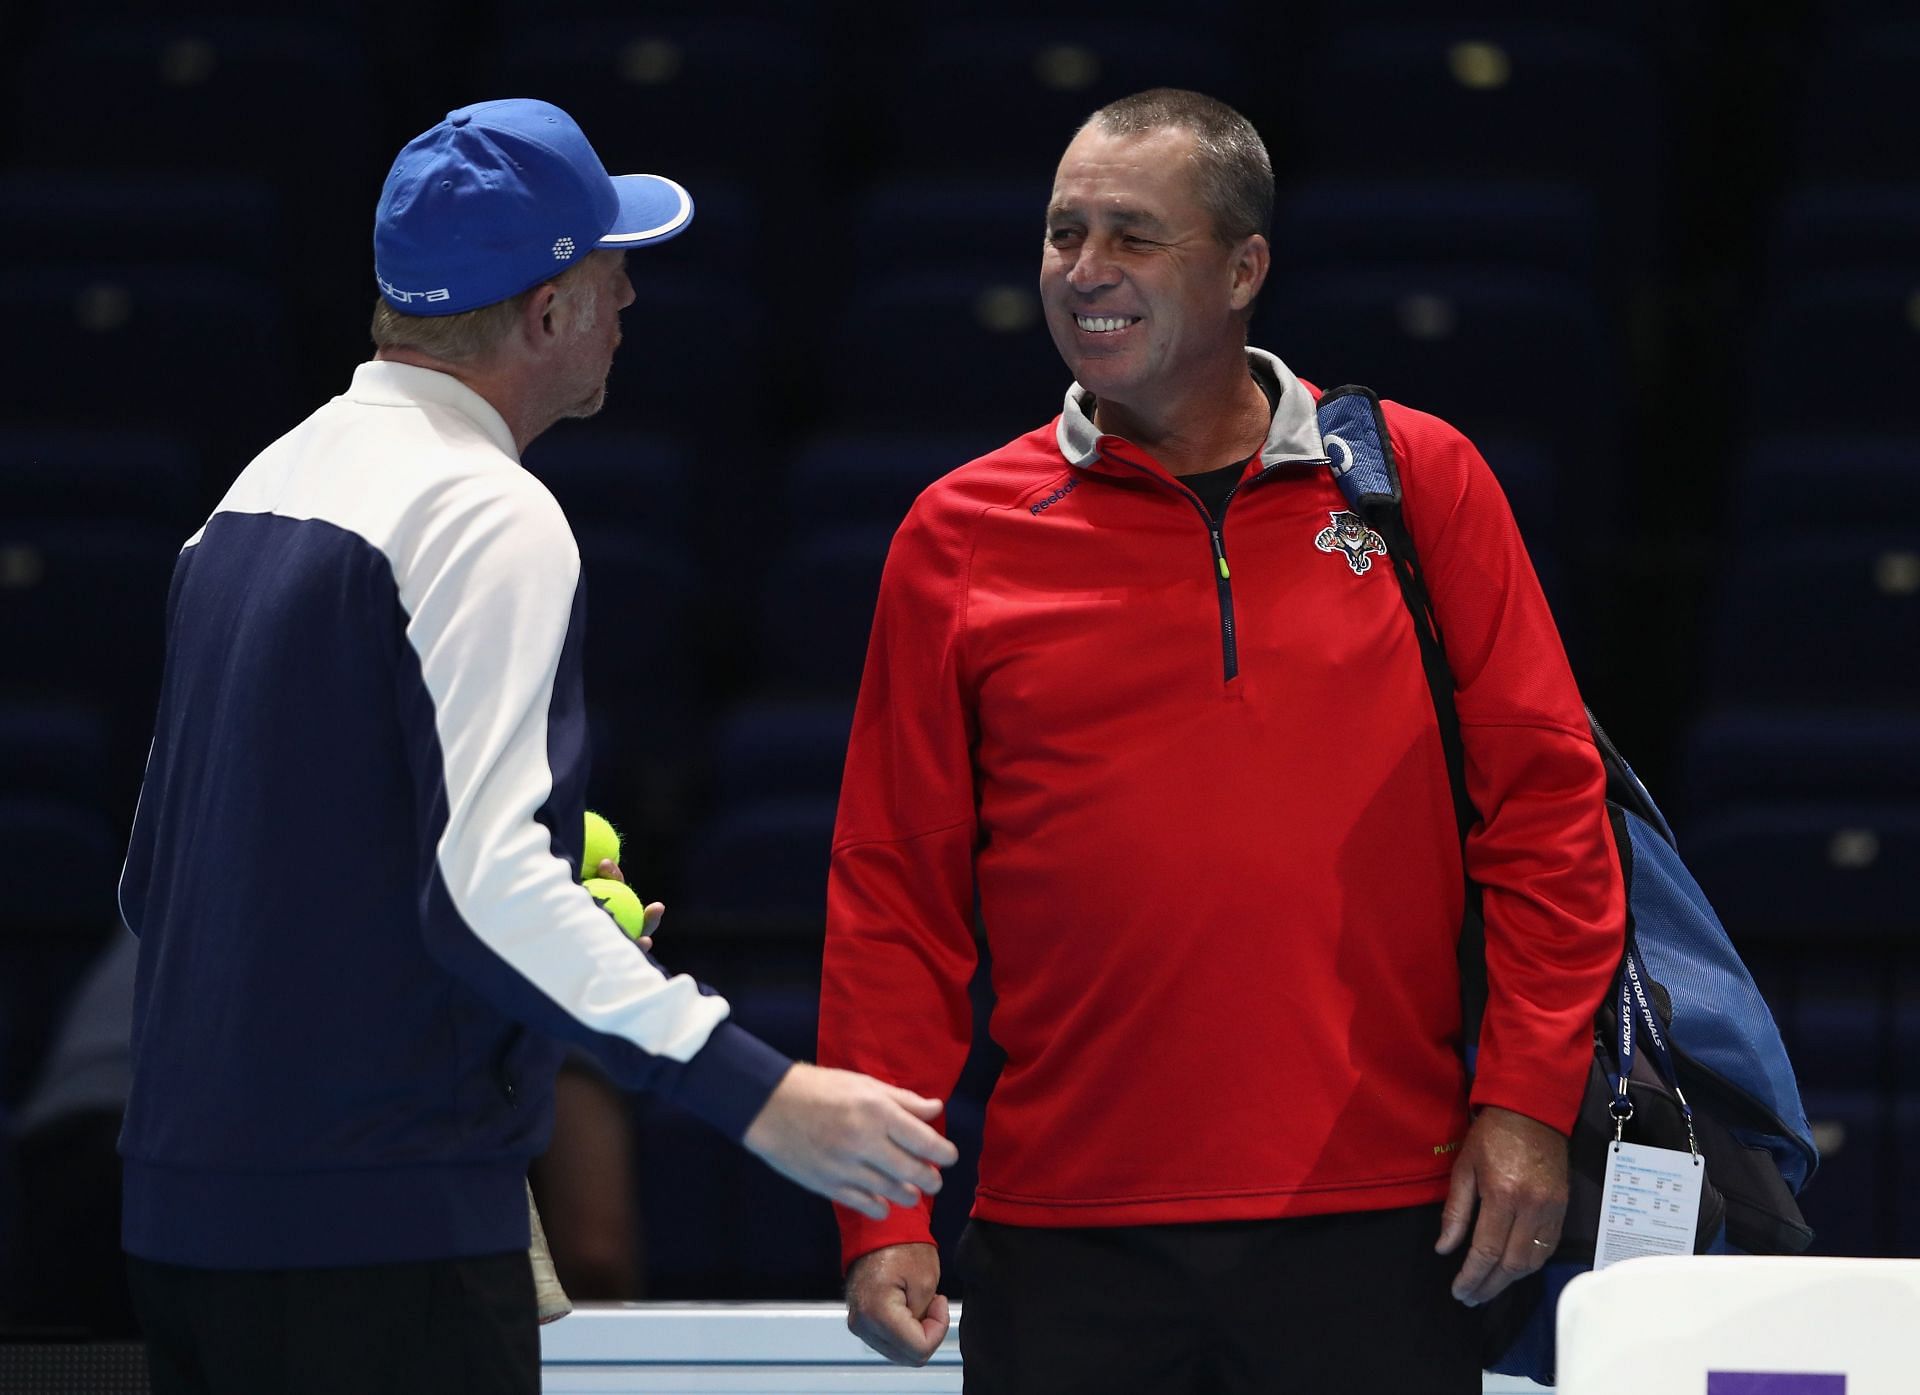 Lendl and Becker are among the players who have won this competition twice